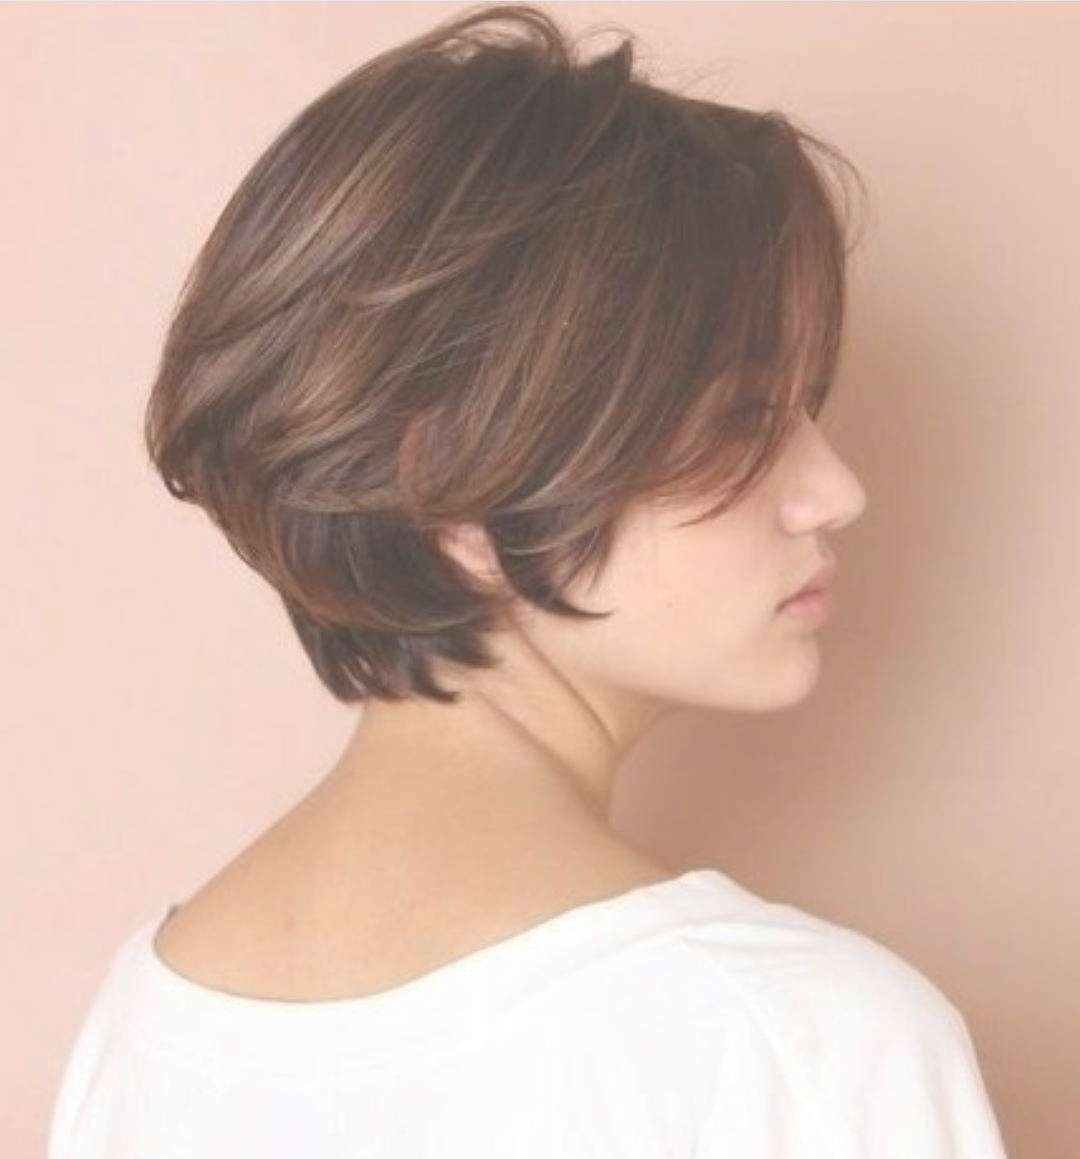 10 Chic Short Bob Haircuts That Balance Your Face Shape! – Short Intended For Newest Bob And Pixie Hairstyles (View 2 of 16)